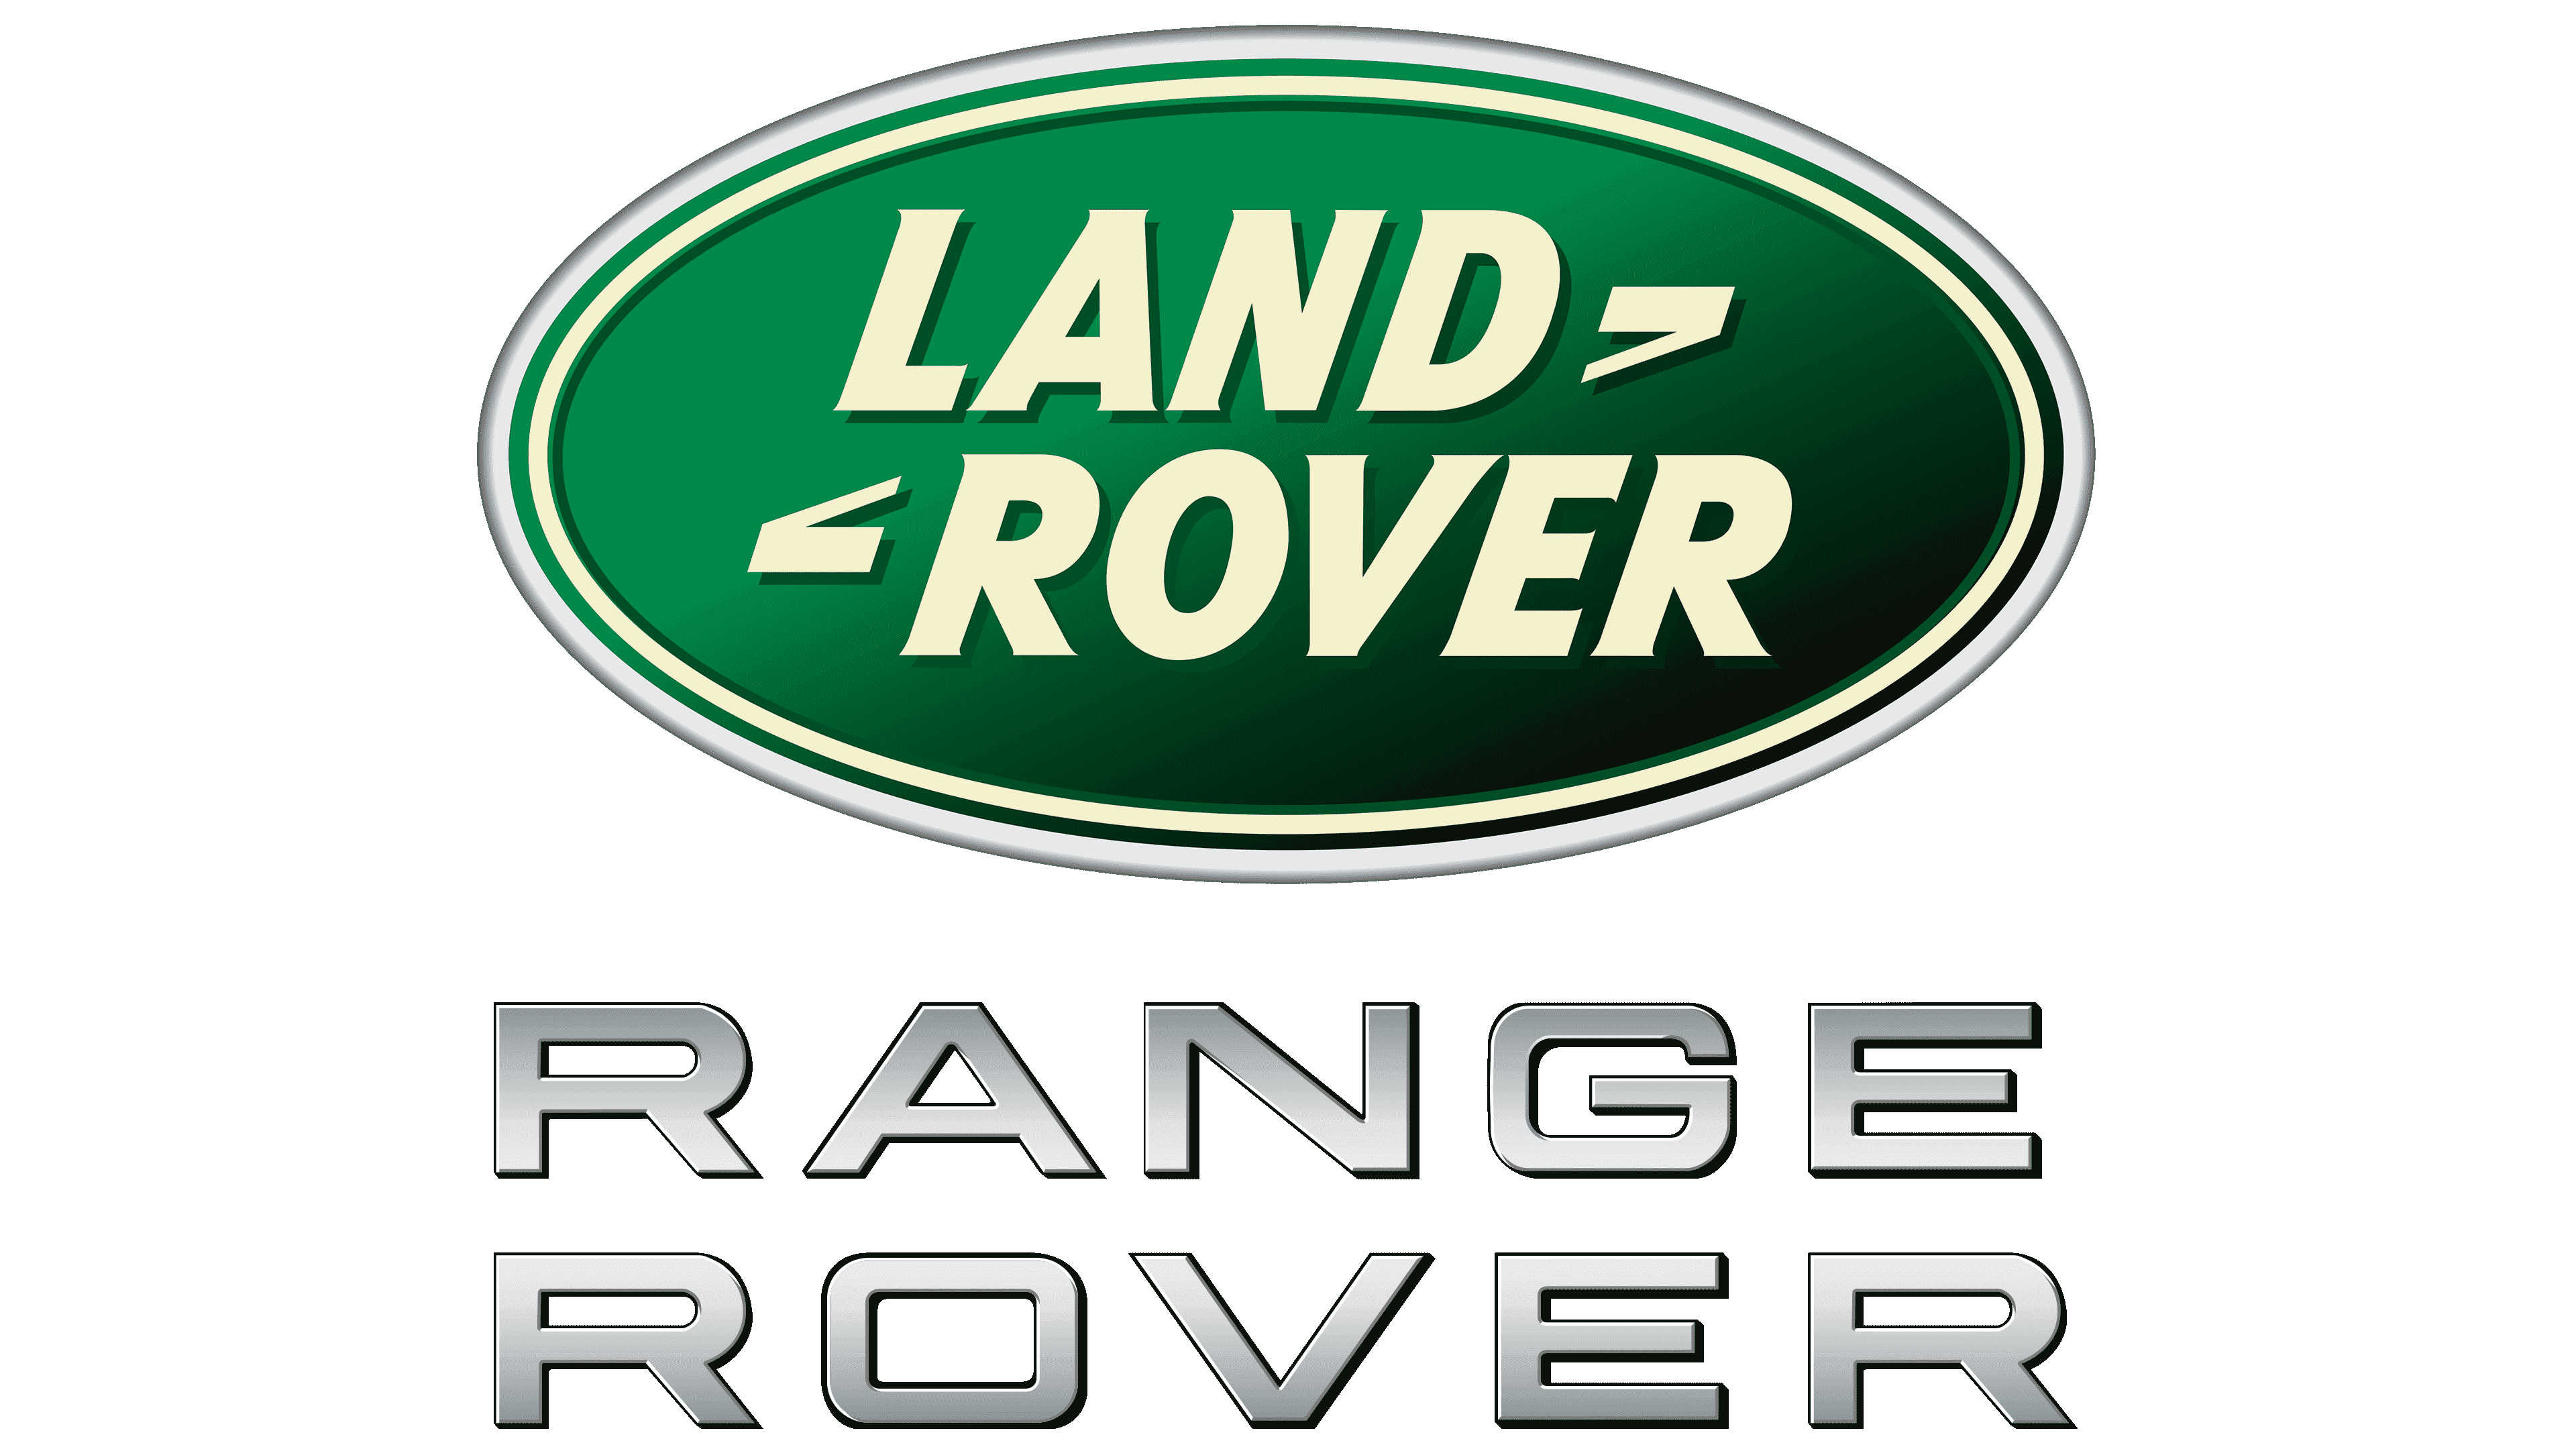 Read more about: Range Rover